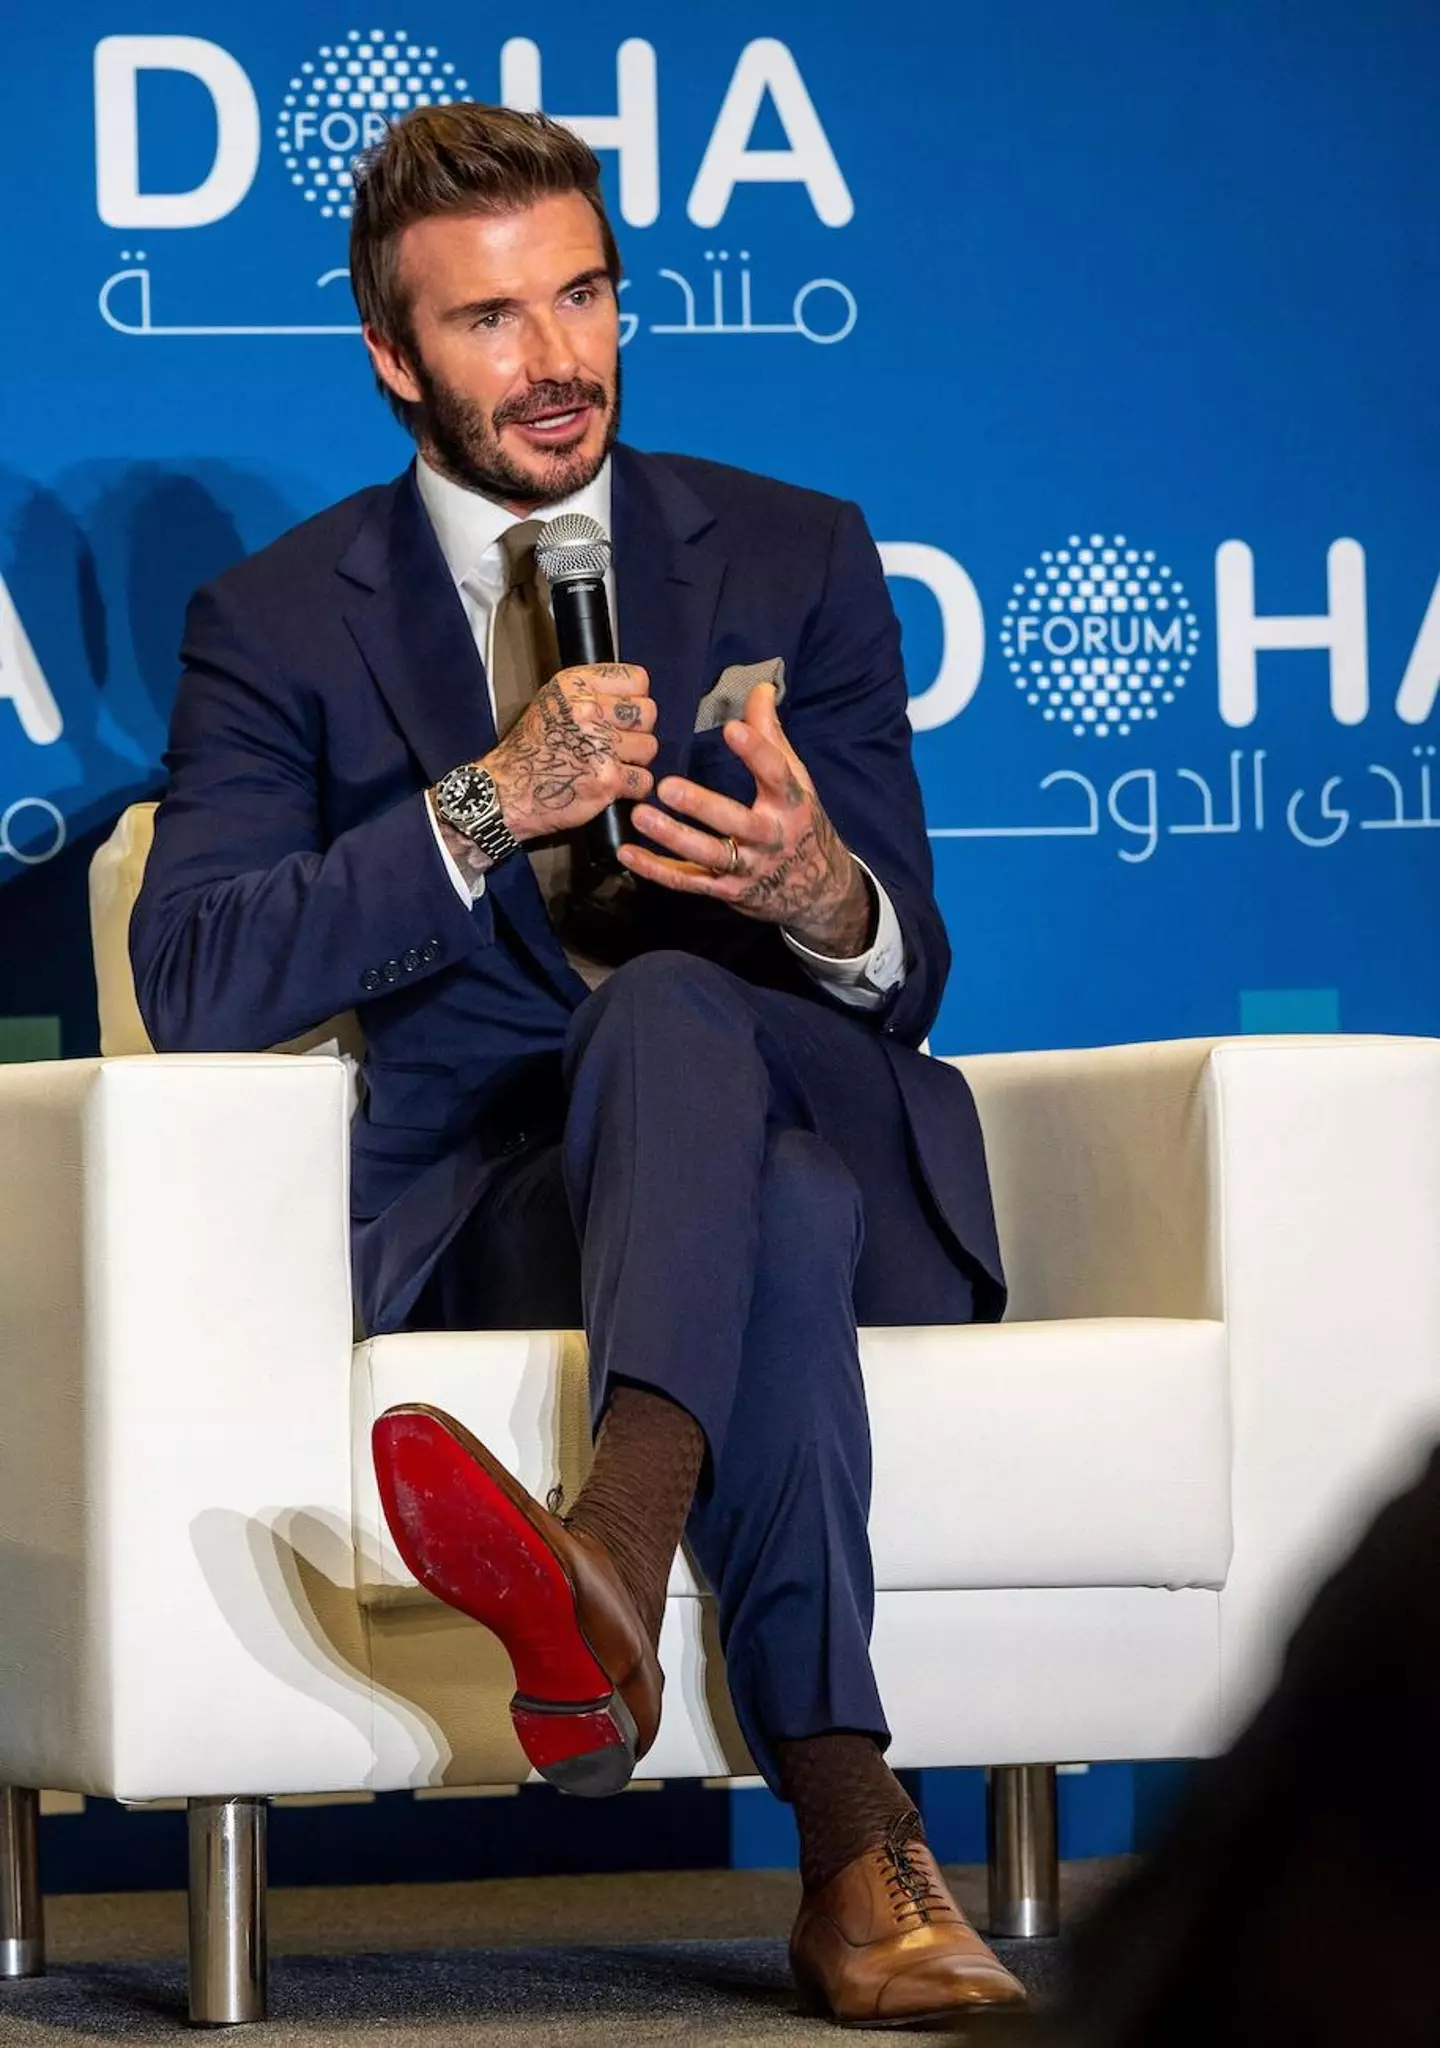 David Beckham has reportedly penned a six figure deal to be an ambassador at the Qatar World Cup.